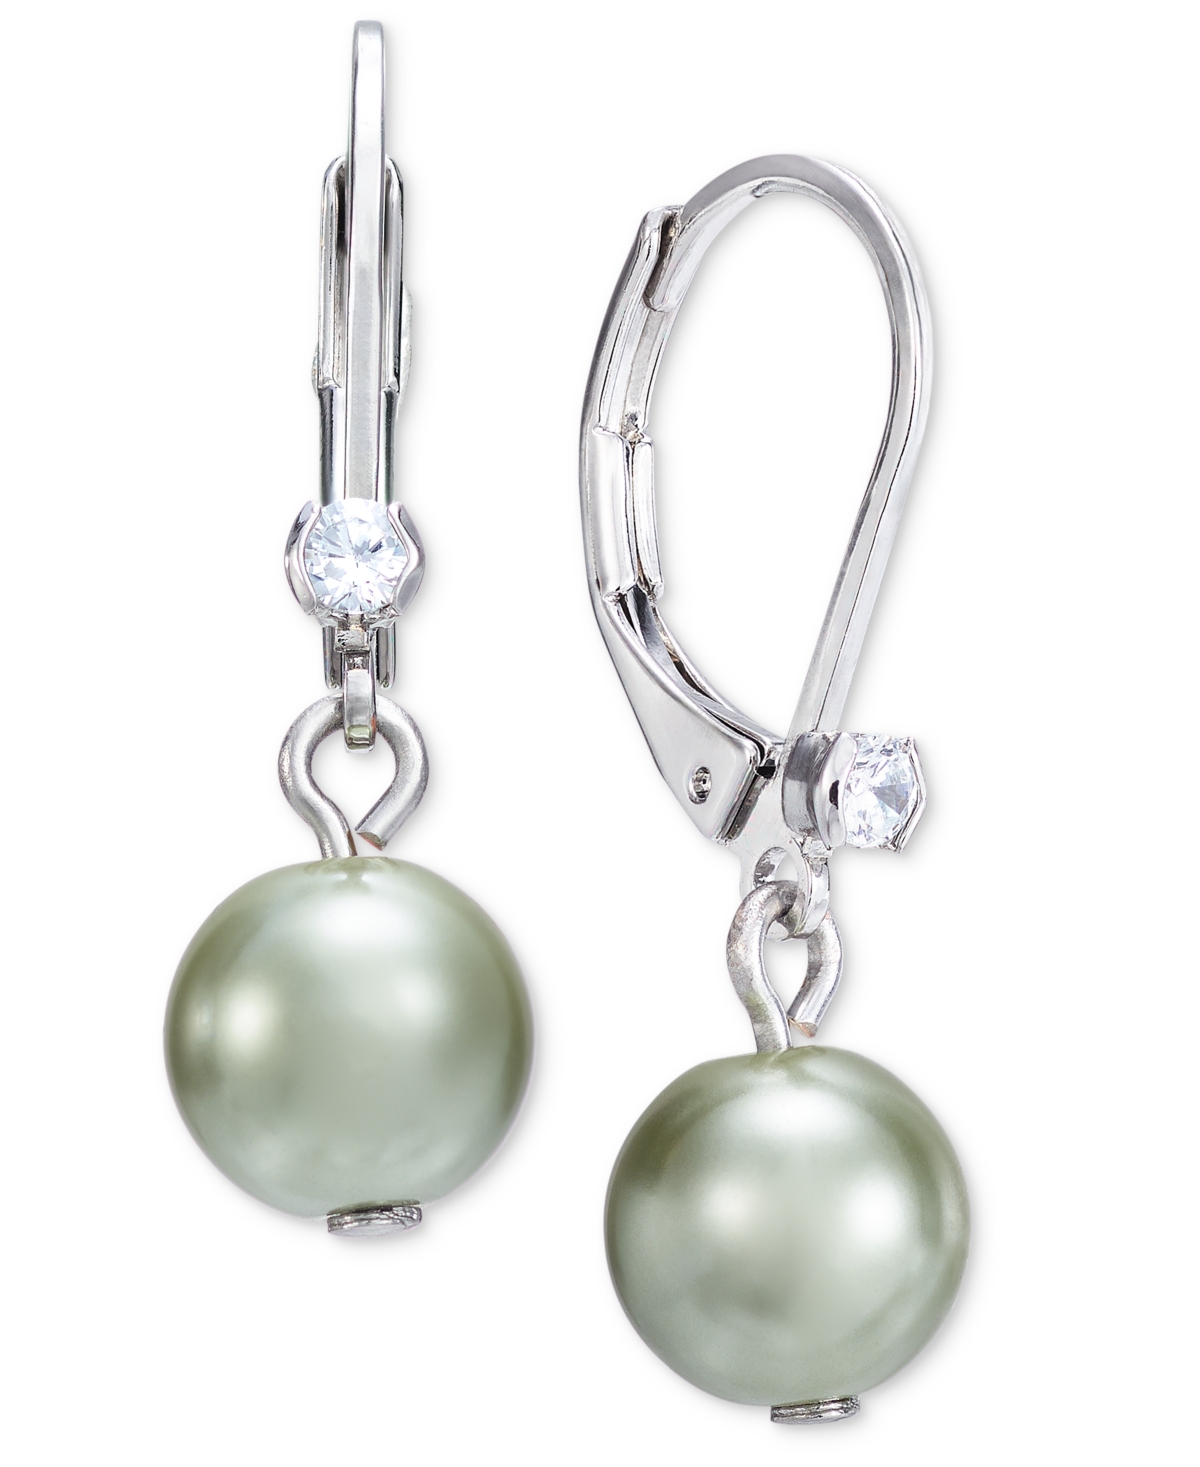 Silver-Tone Crystal & Color Imitation Pearl Drop Earrings, Created for Macy's - Multi